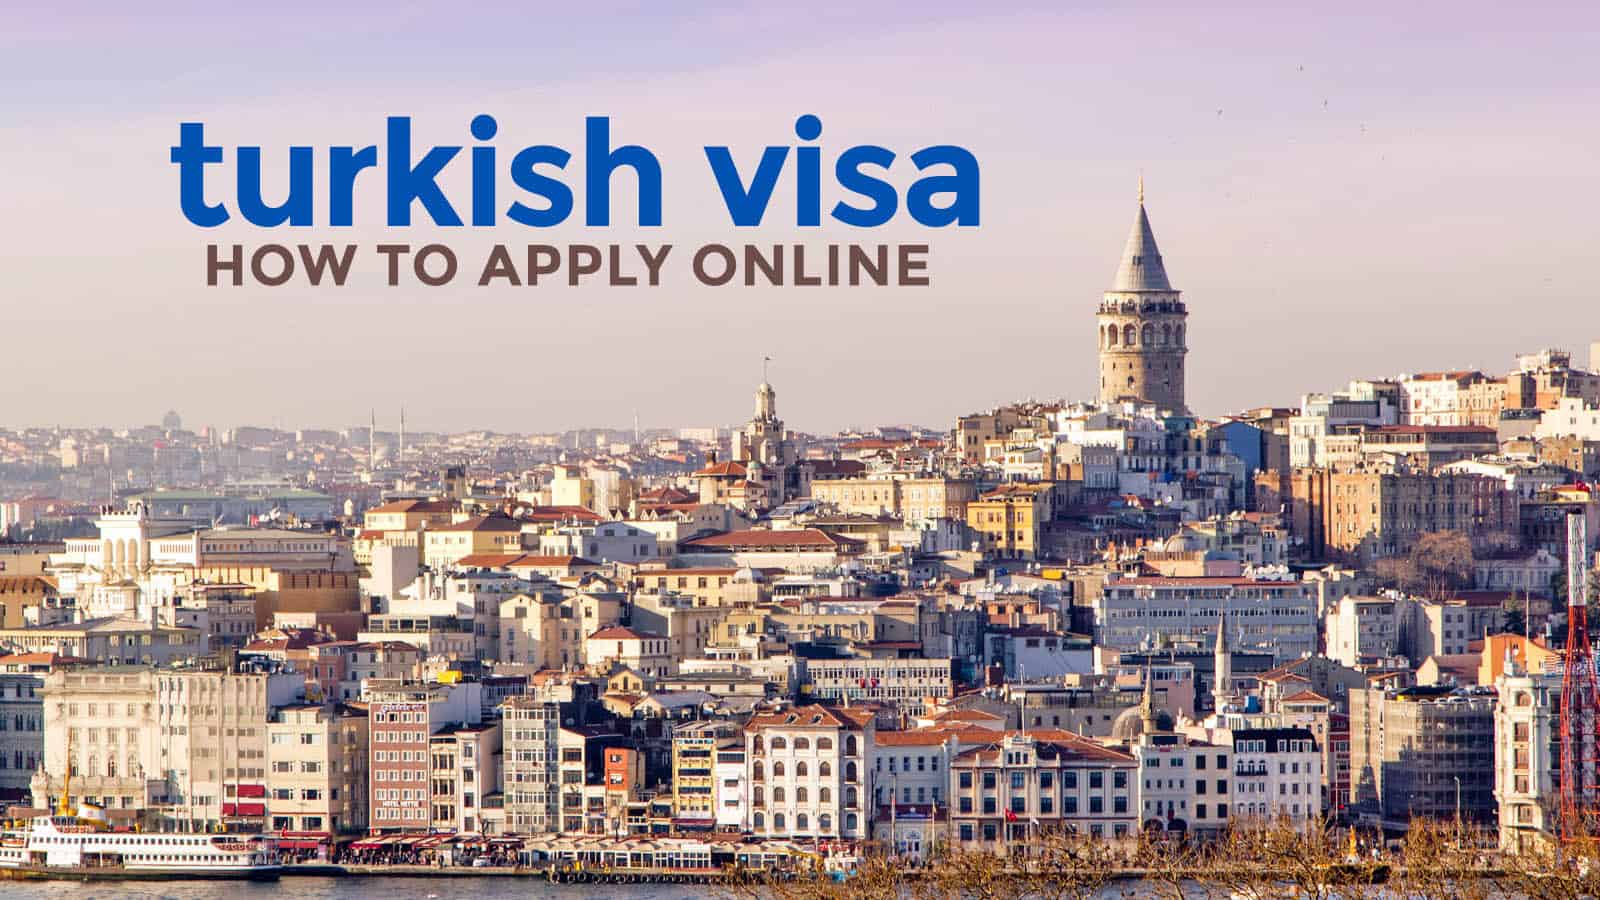 TURKEY E-VISA: Requirements + How to Apply Online